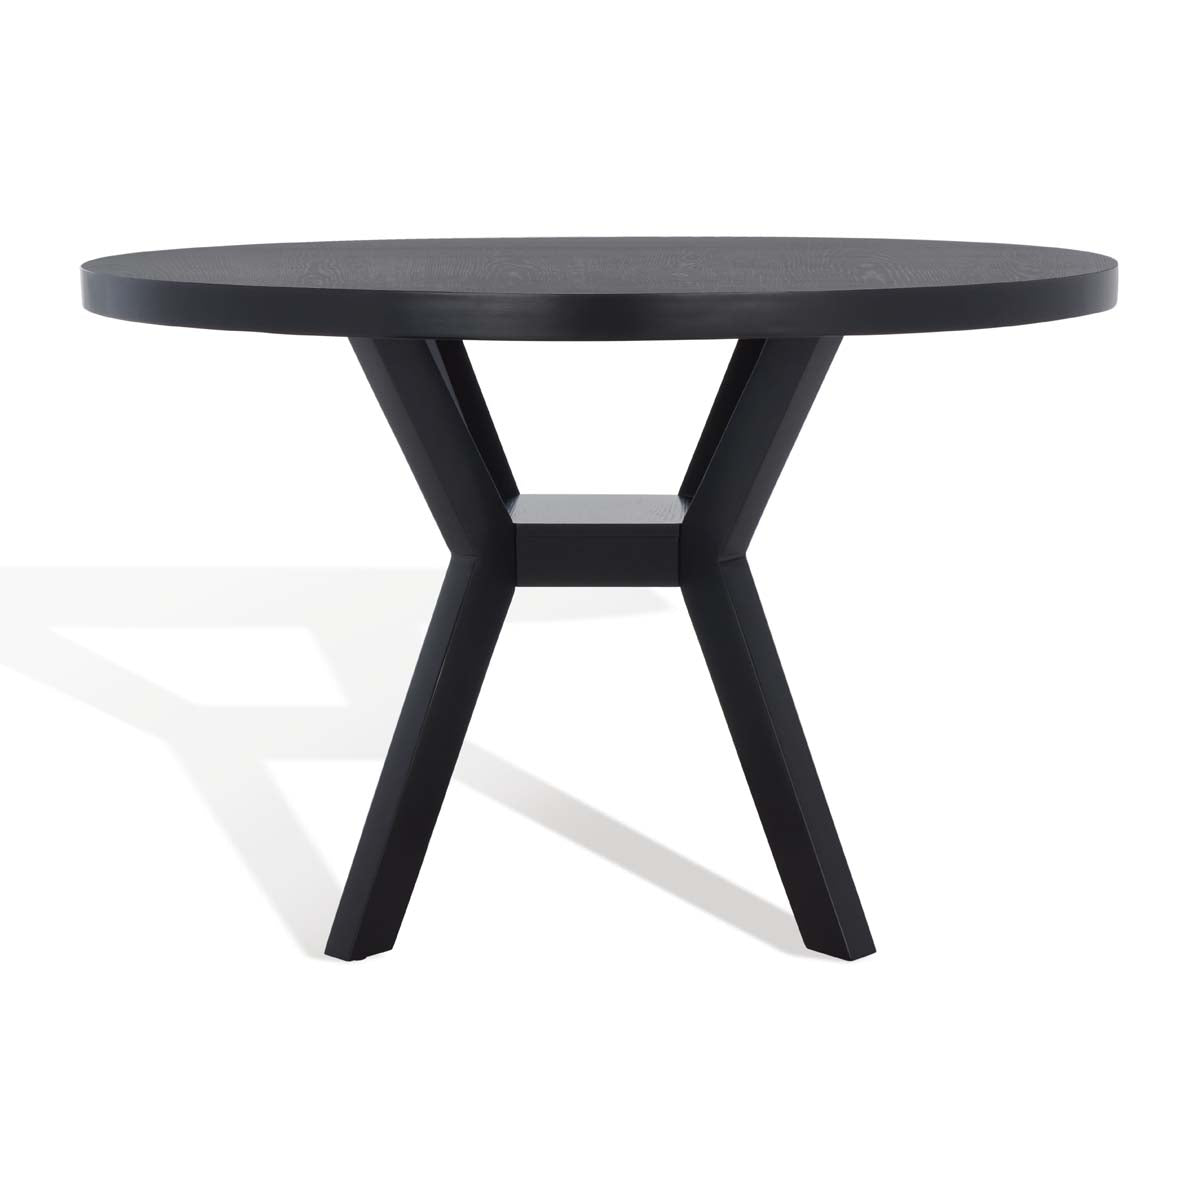 Safavieh Couture Luis Round Wood Dining Table